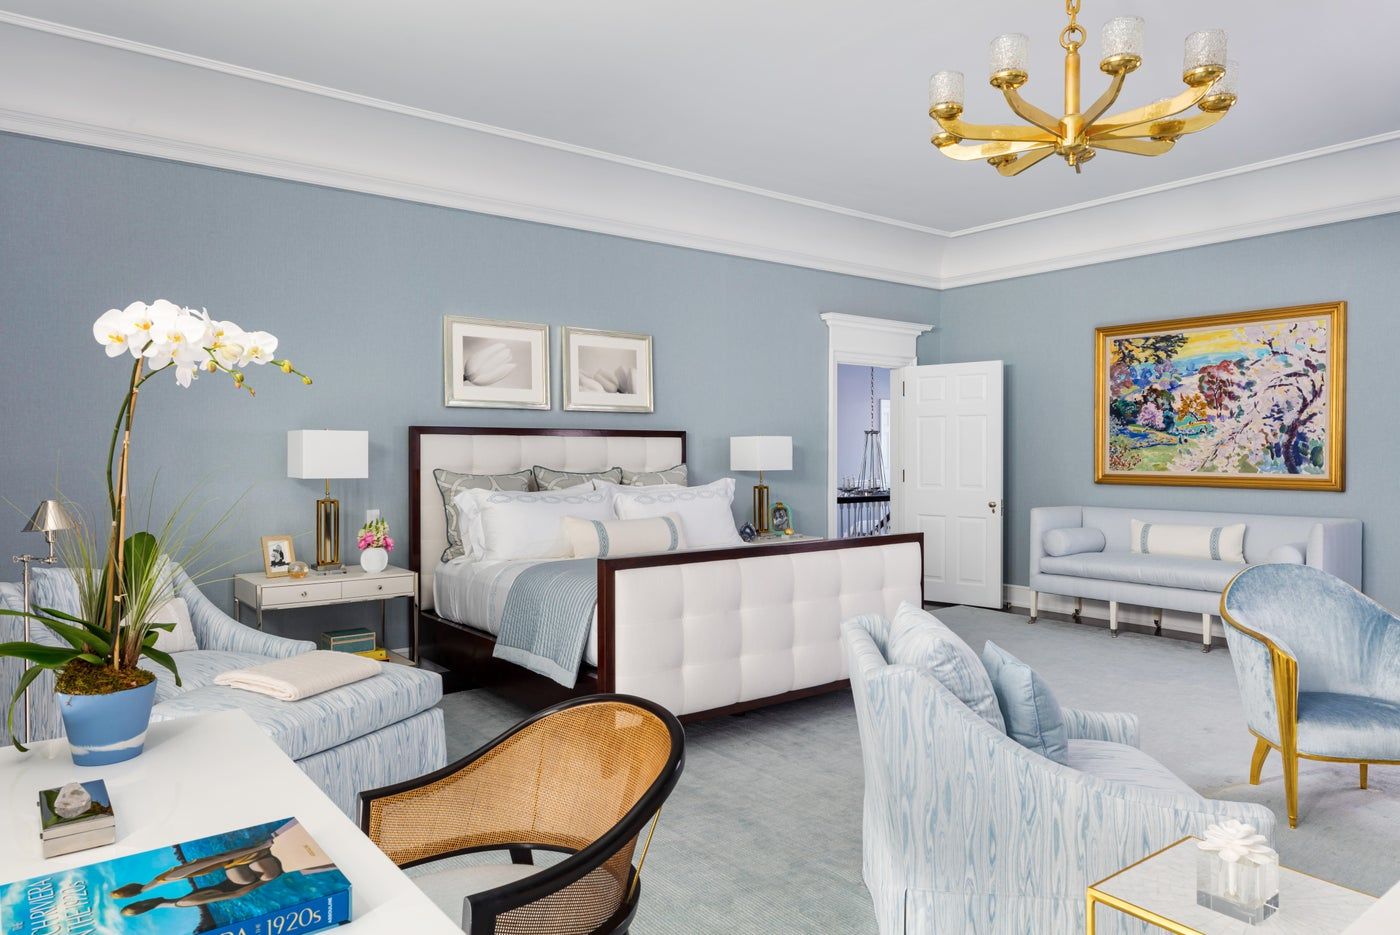 Blue and white bedroom ideas: 10 cool blue and white looks |